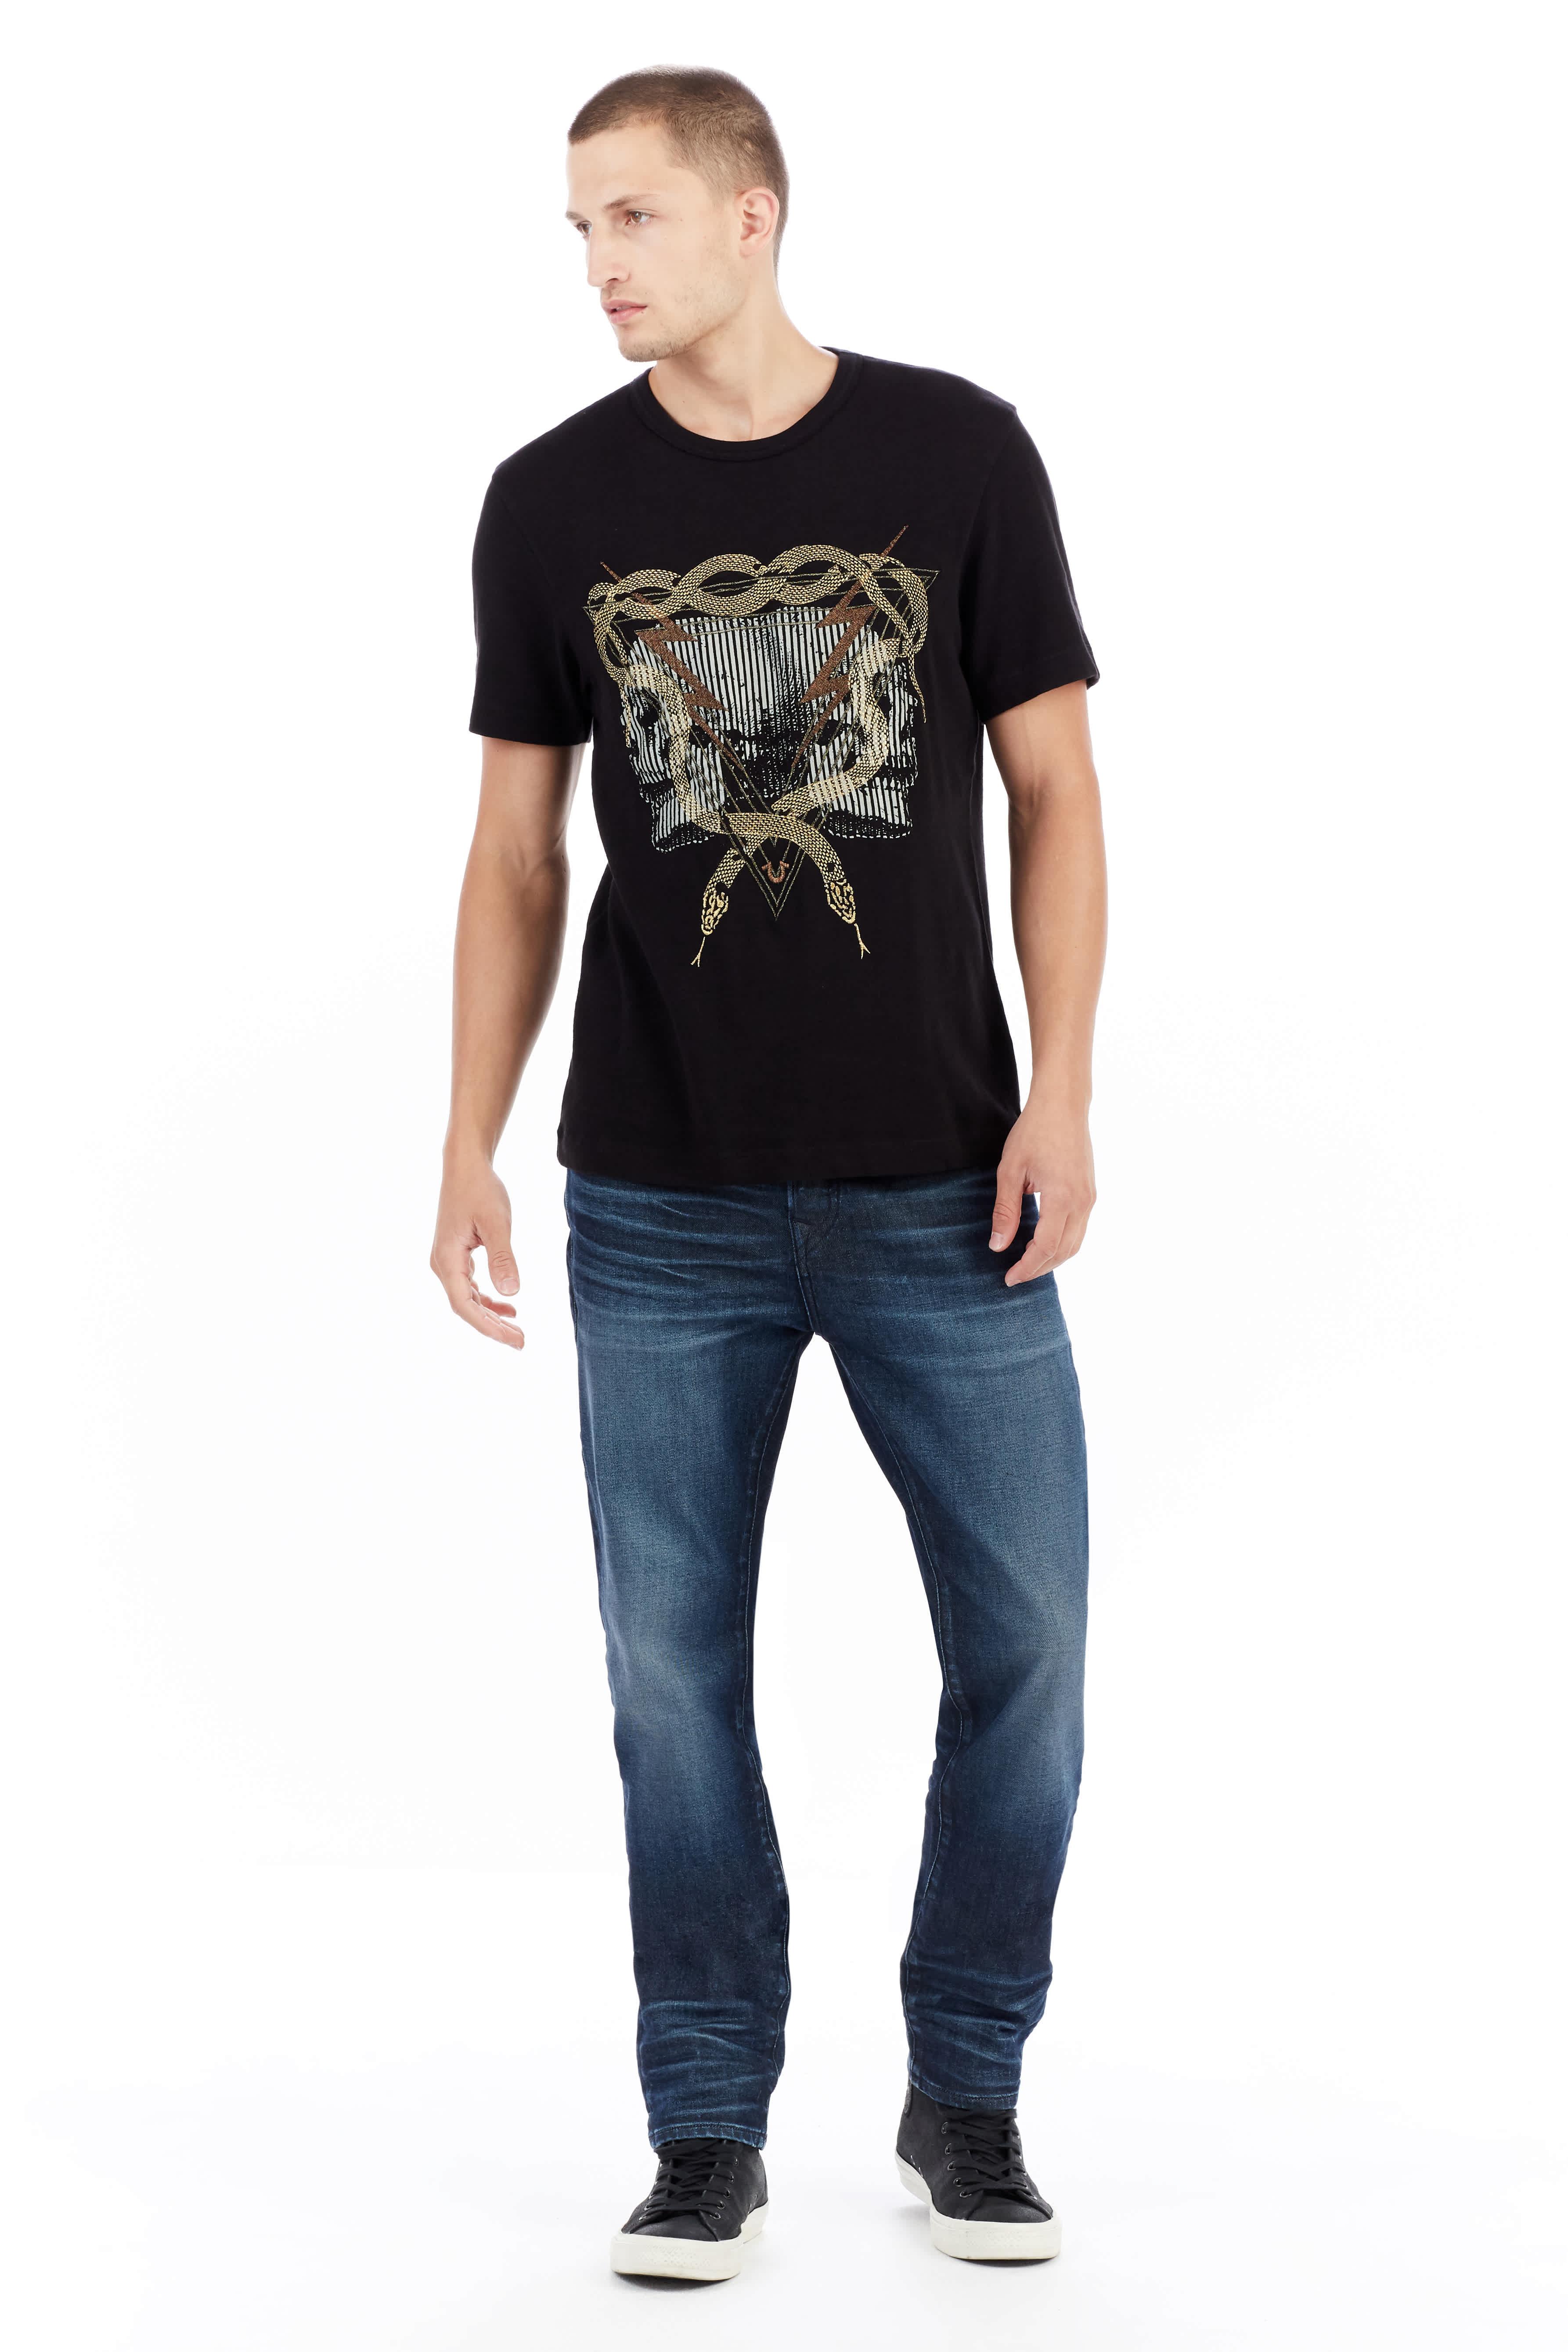 TWIN BOLT GRAPHIC MENS TEE